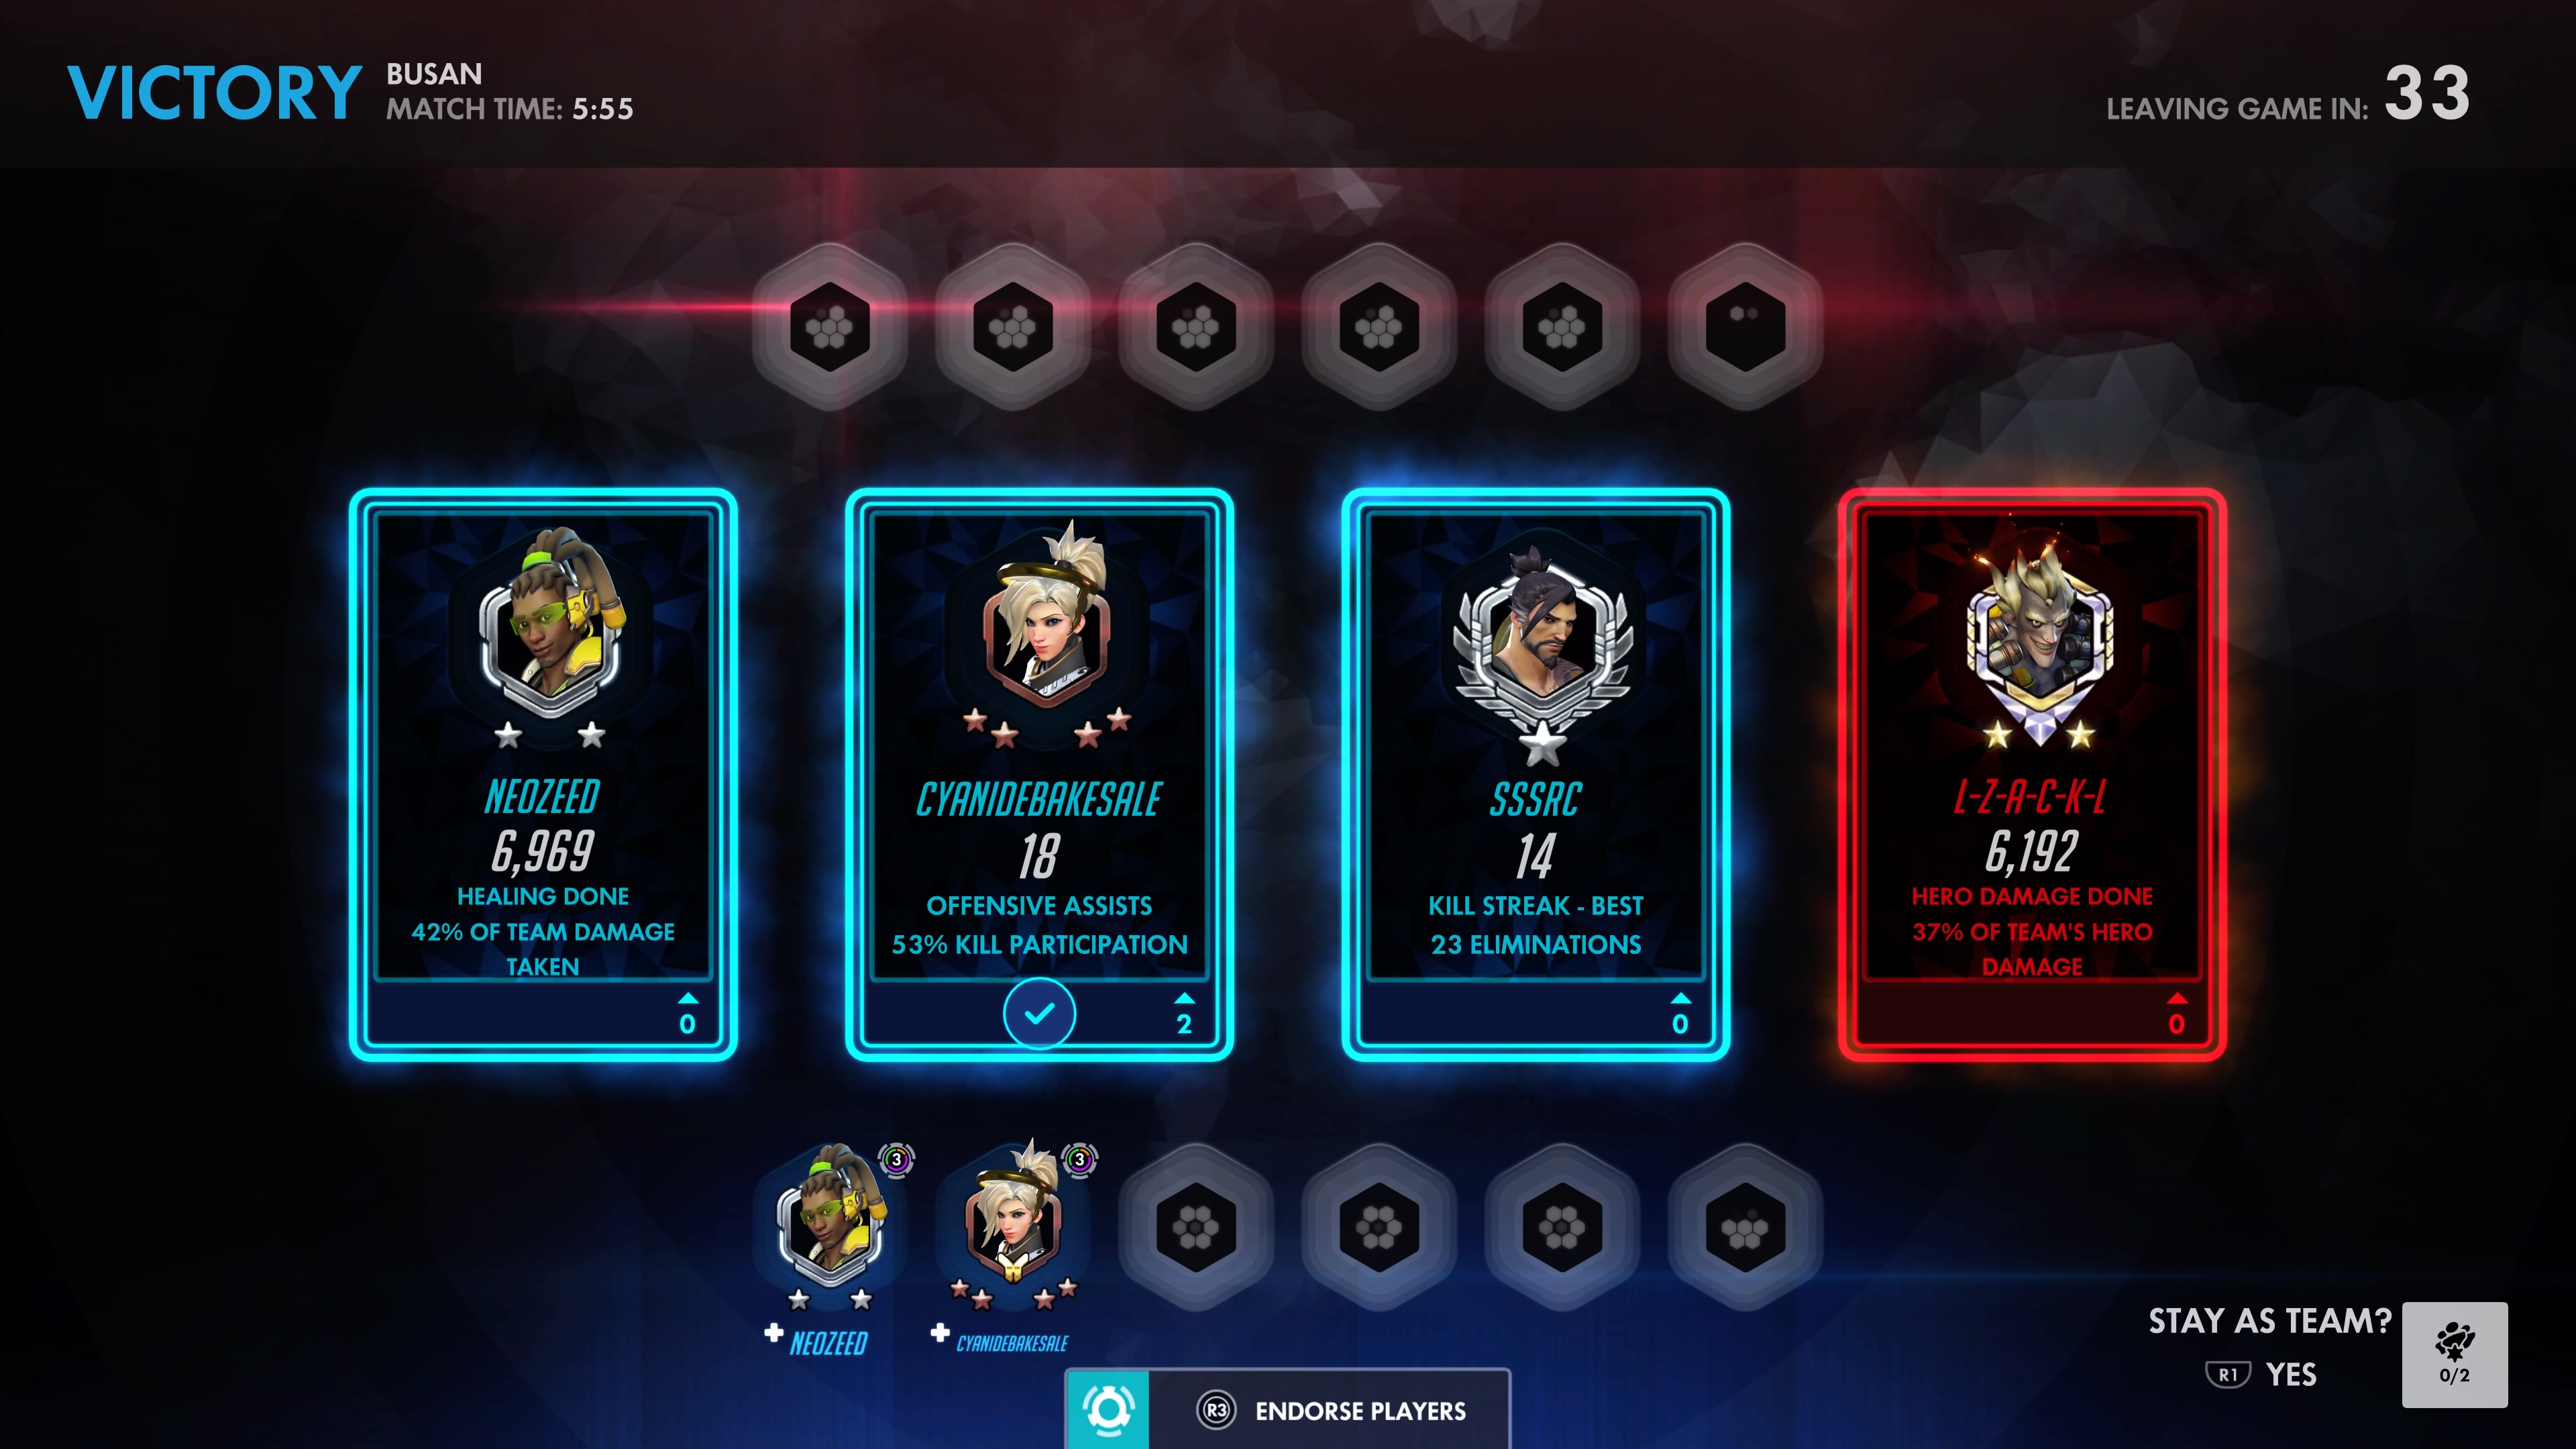 A post-game scorecard screen from the original Overwatch, showing performance highlights for Lucio, Mercy, Hanzo, and Junkrat players. 